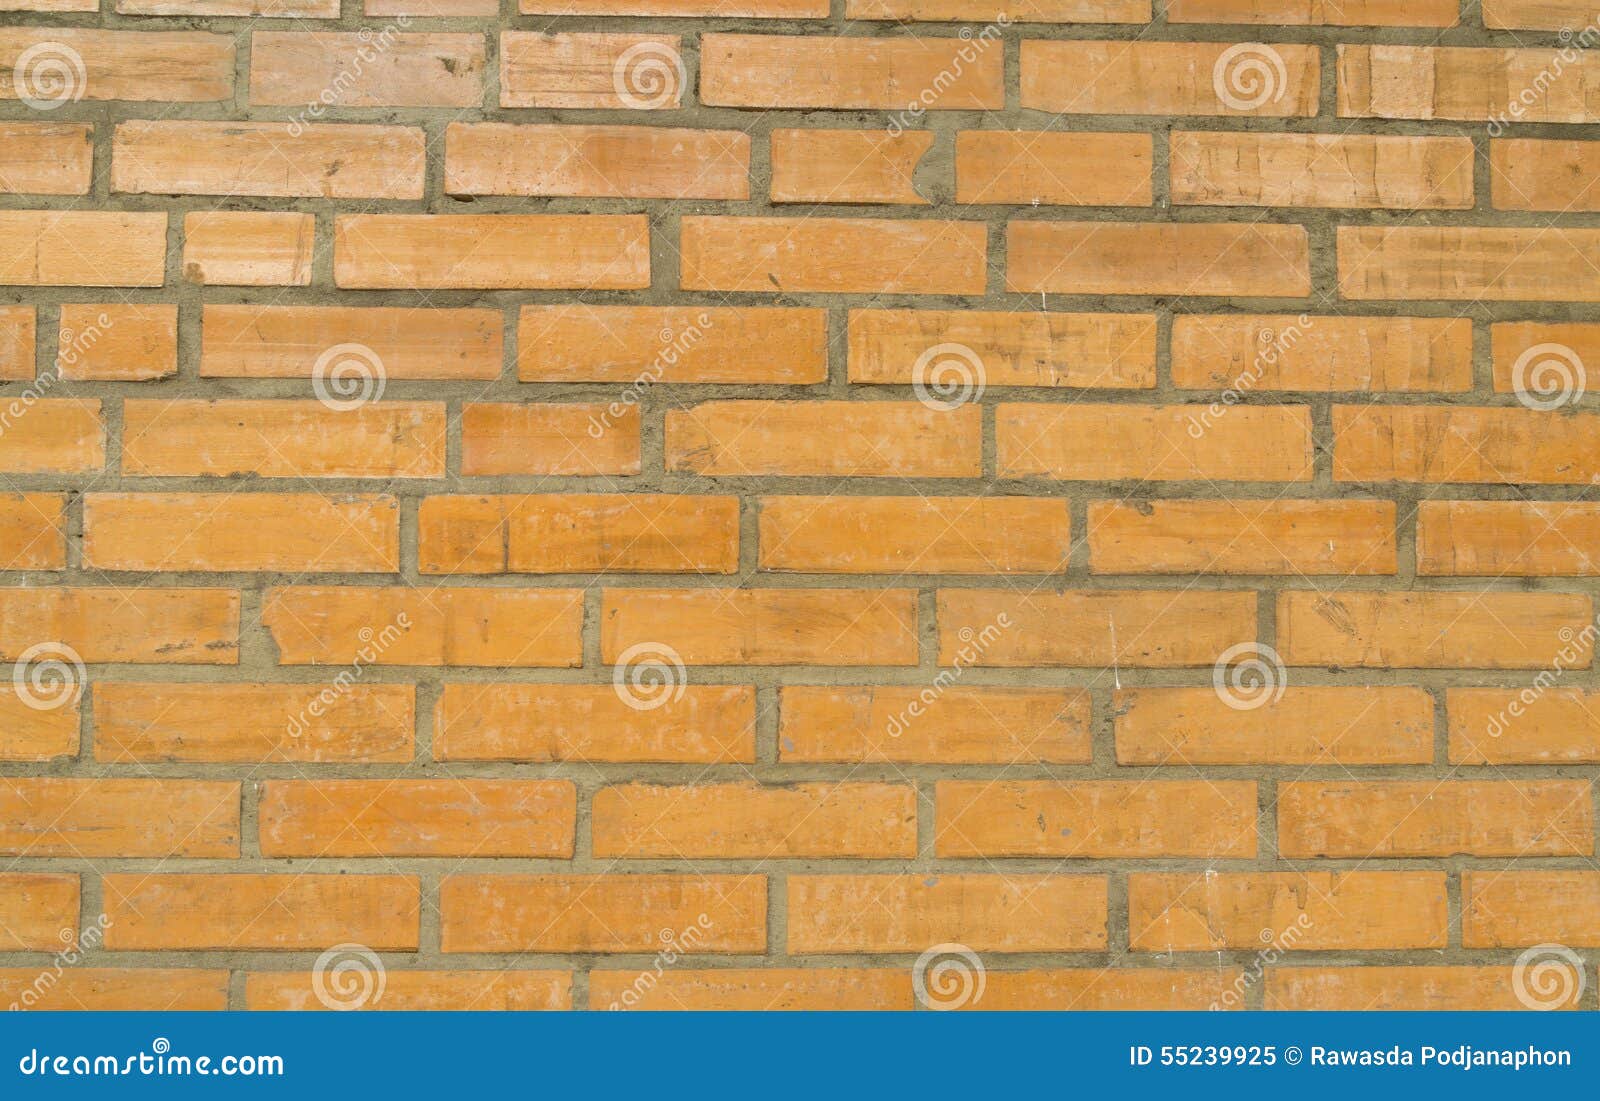 new brick background at home